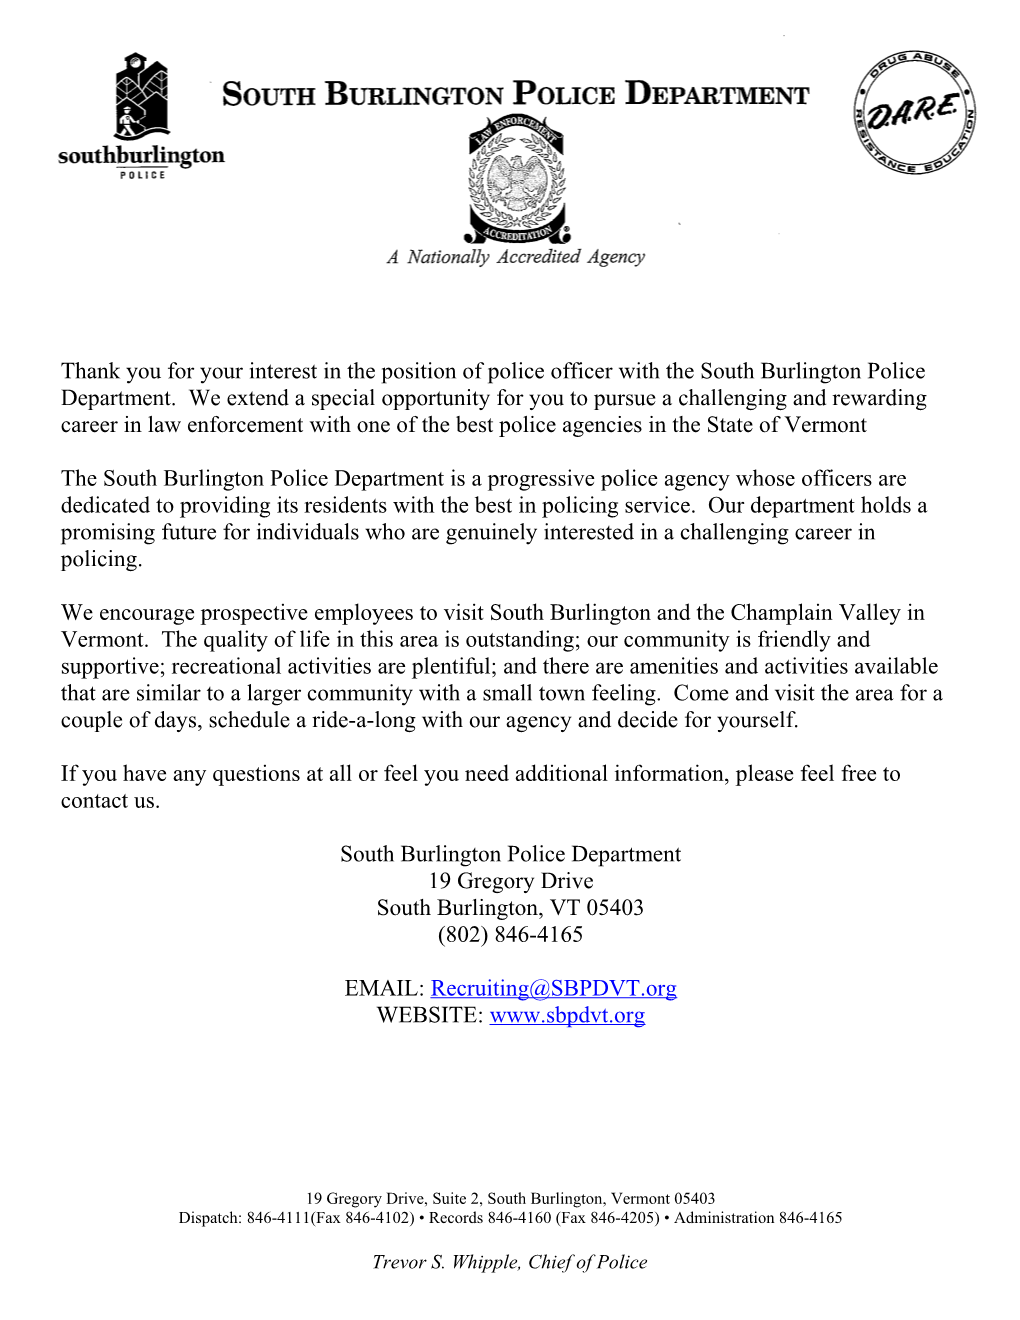 Thank You for Your Interest in the Position of Police Officer with the South Burlington